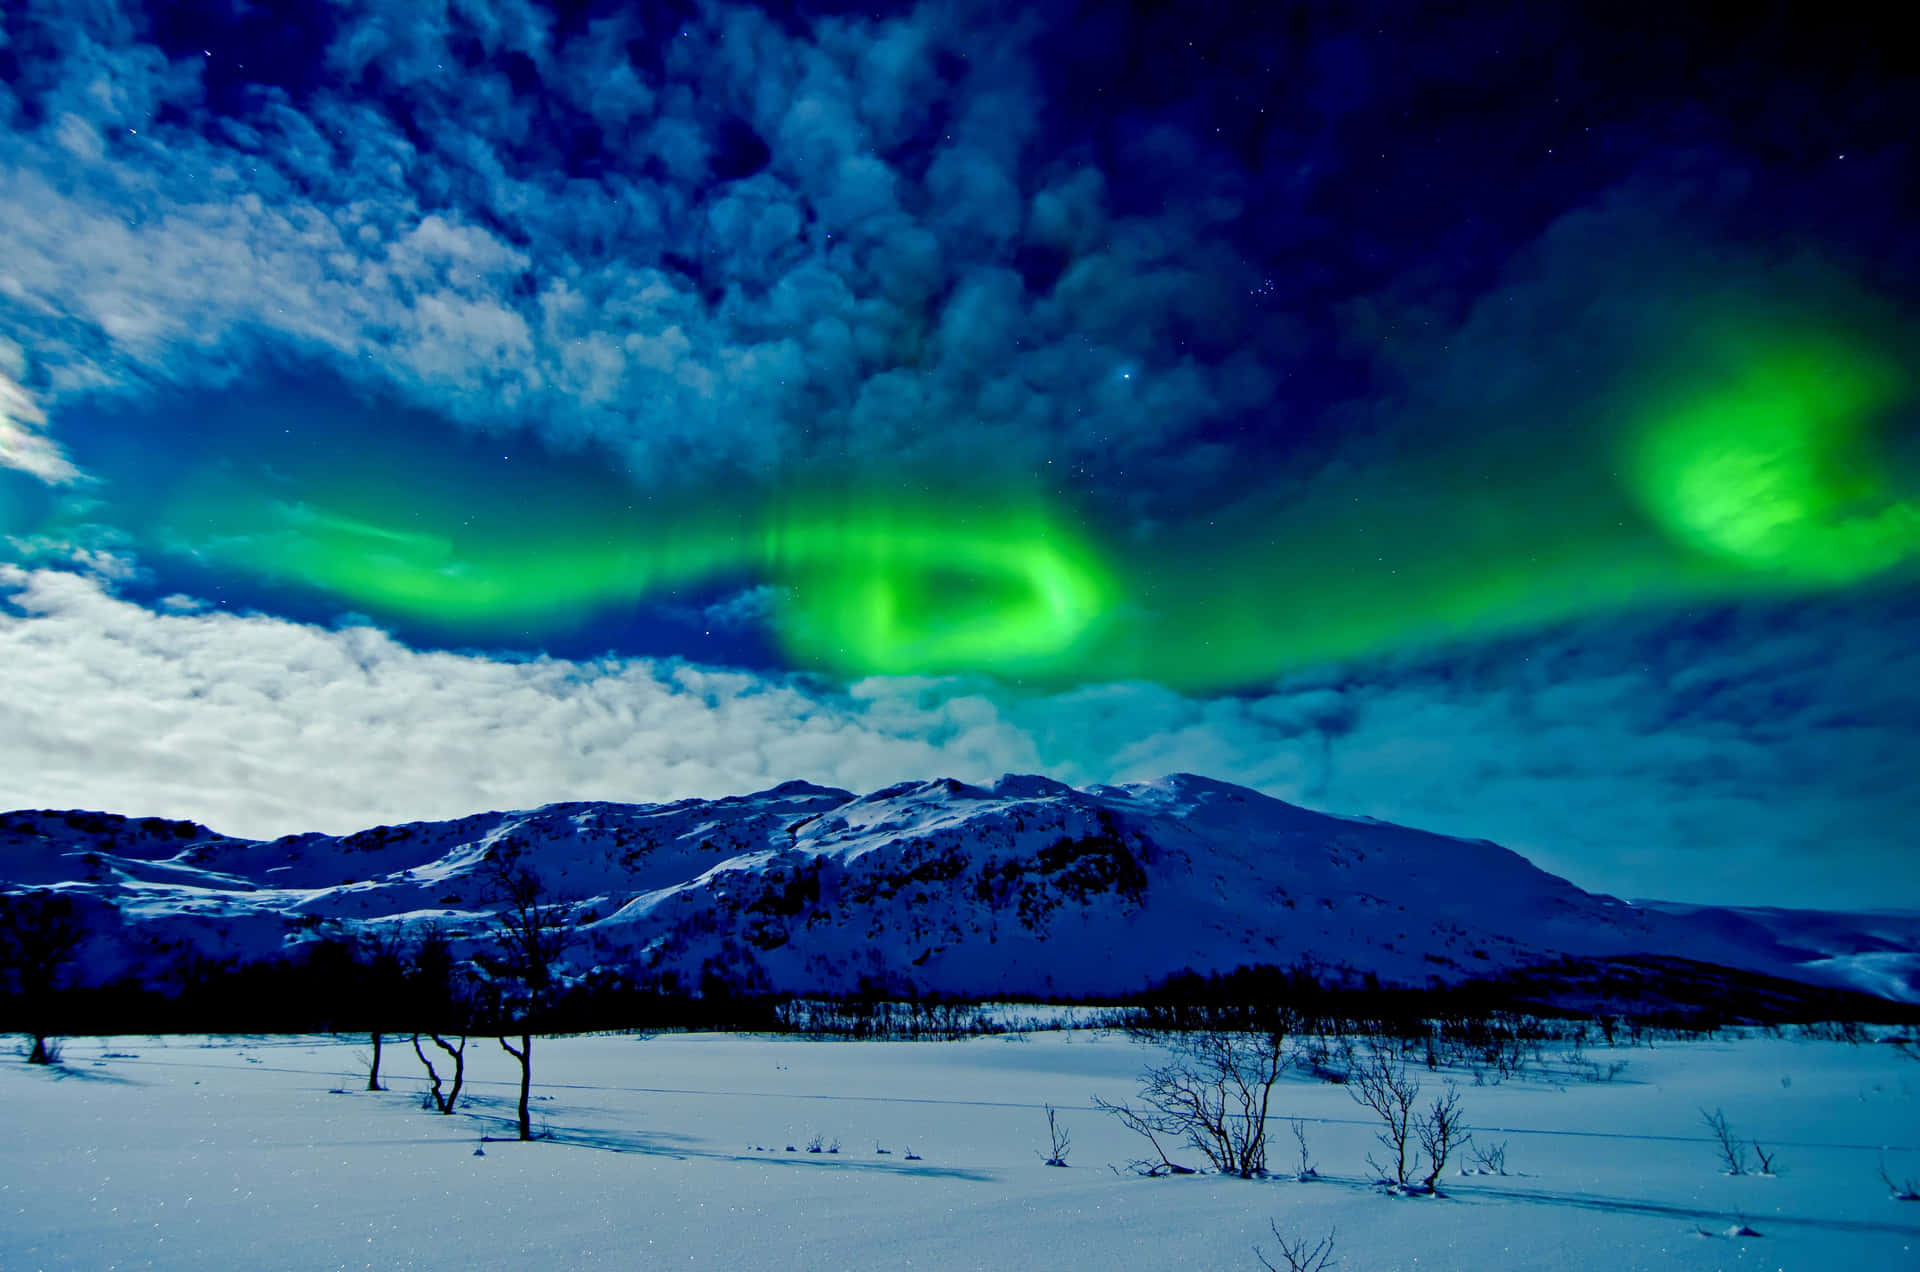 "The vibrant colors of the aurora fill the night sky"